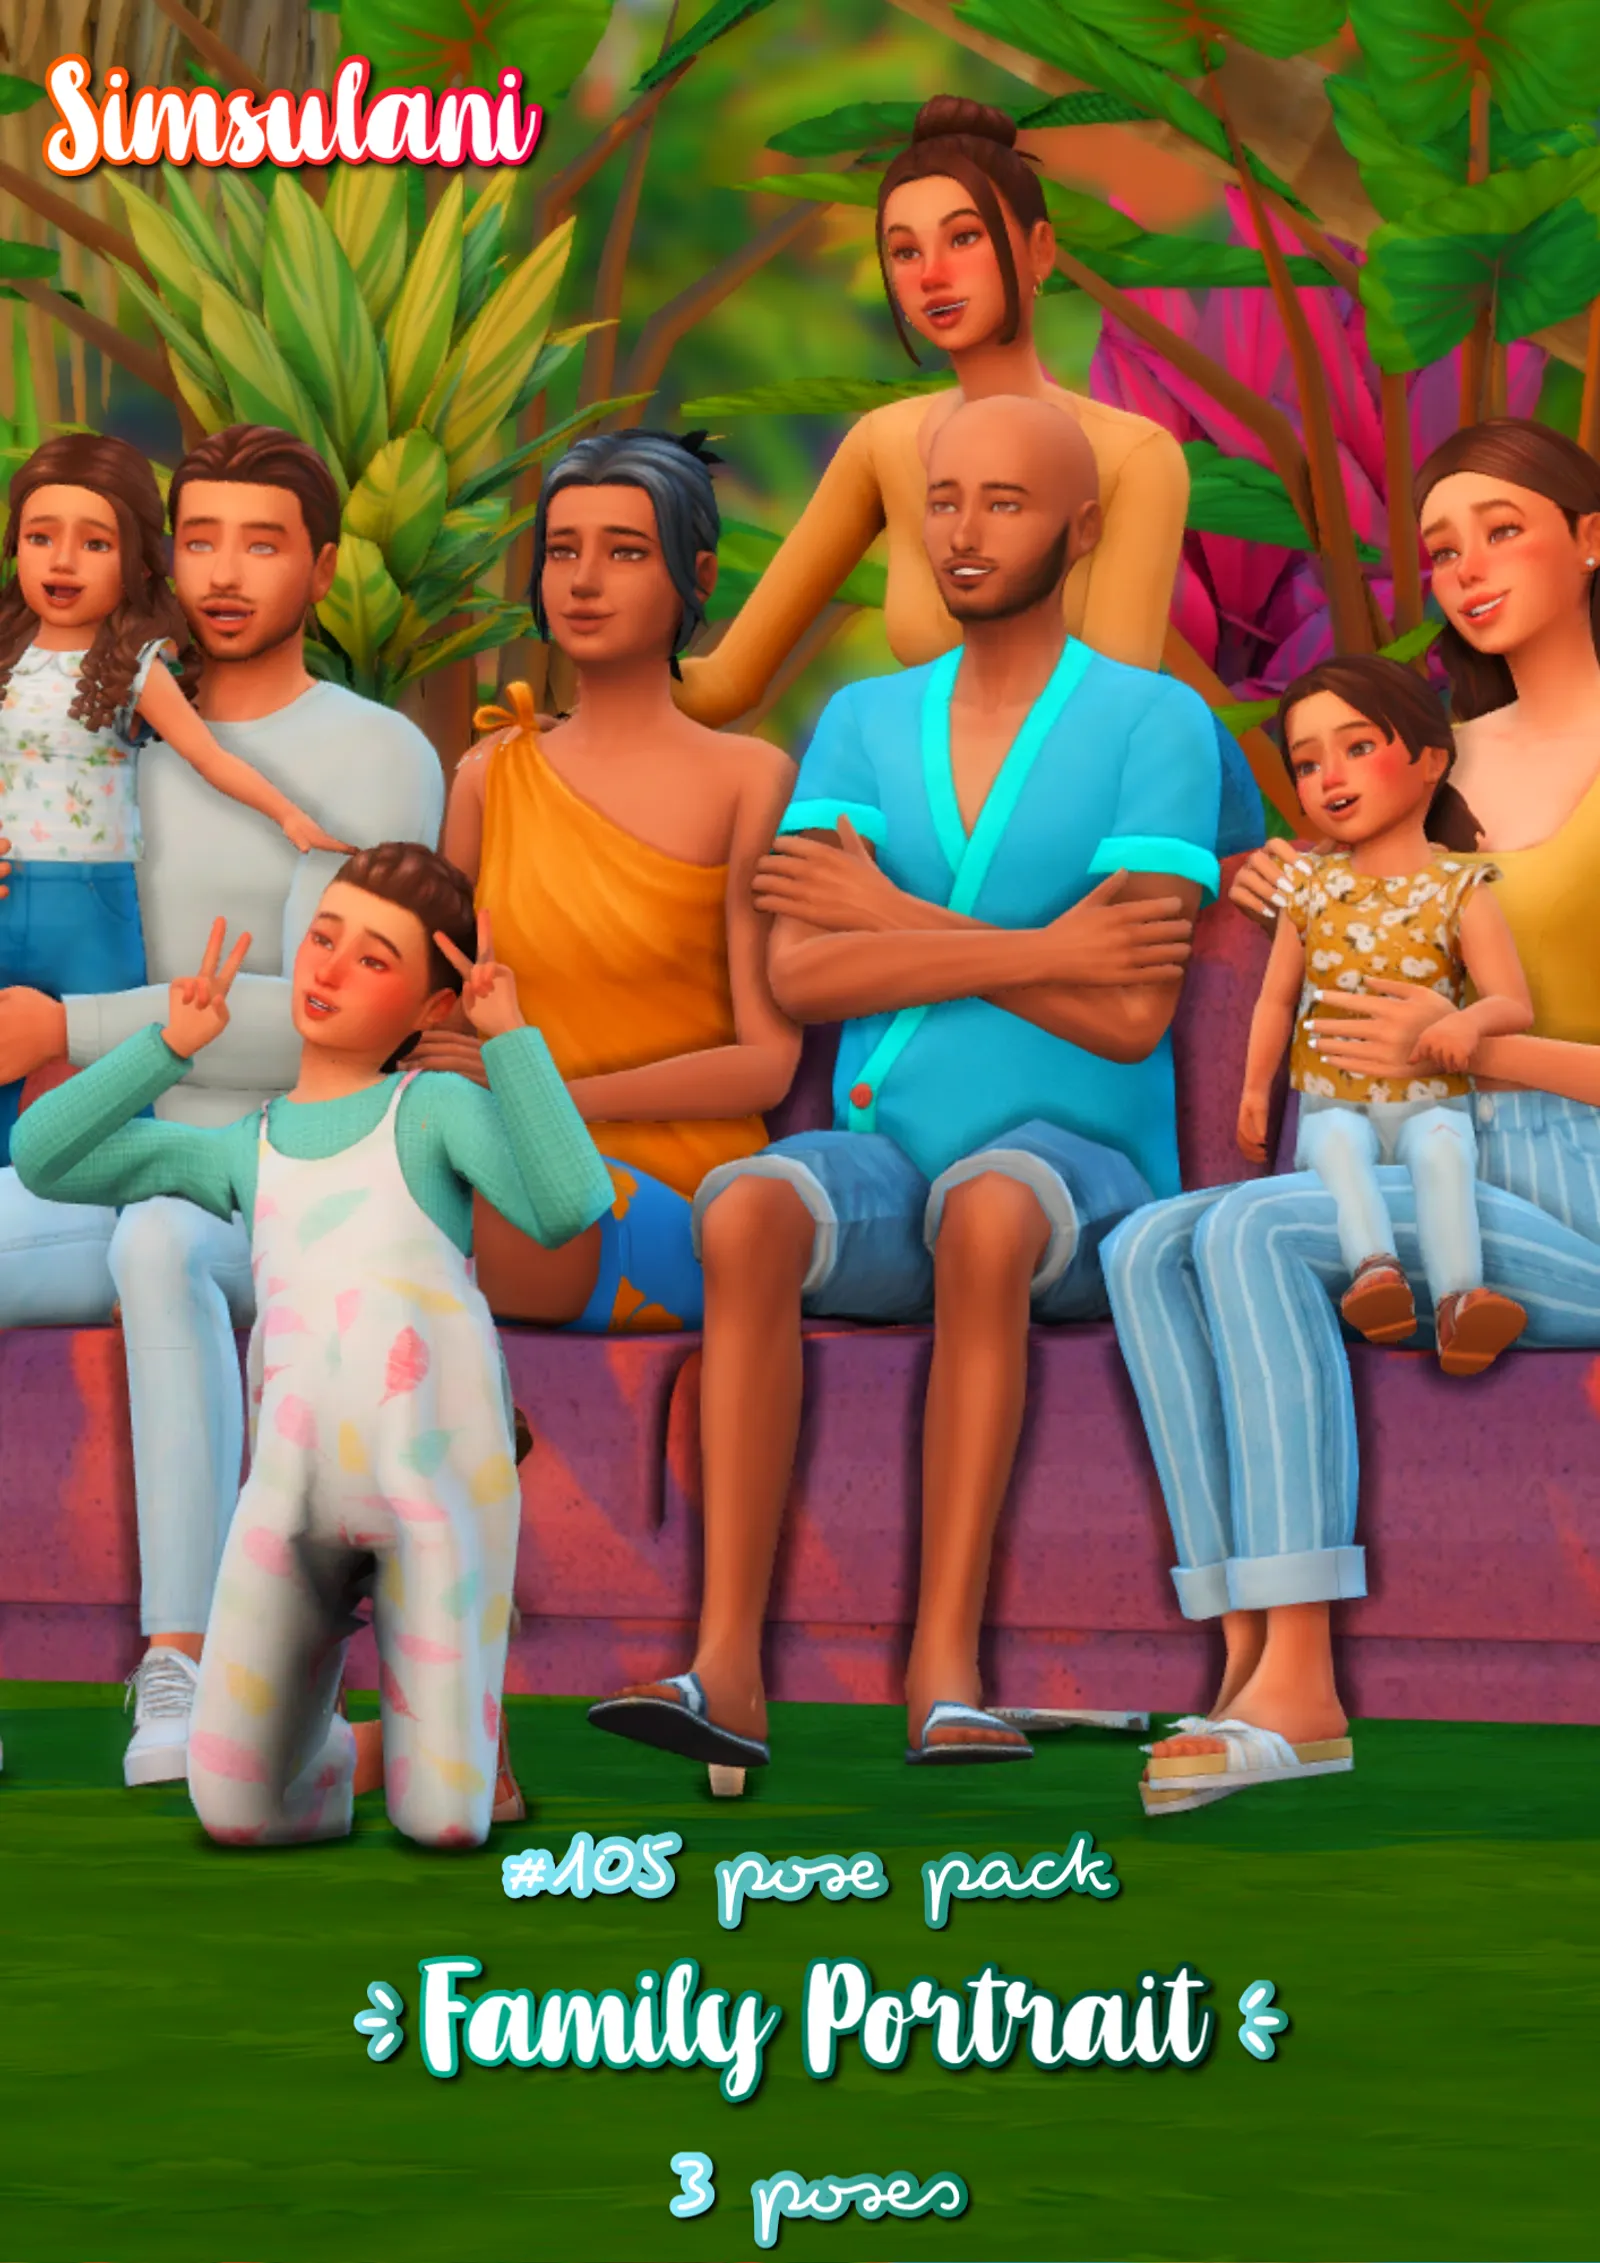 #105 Pose Pack family portait 